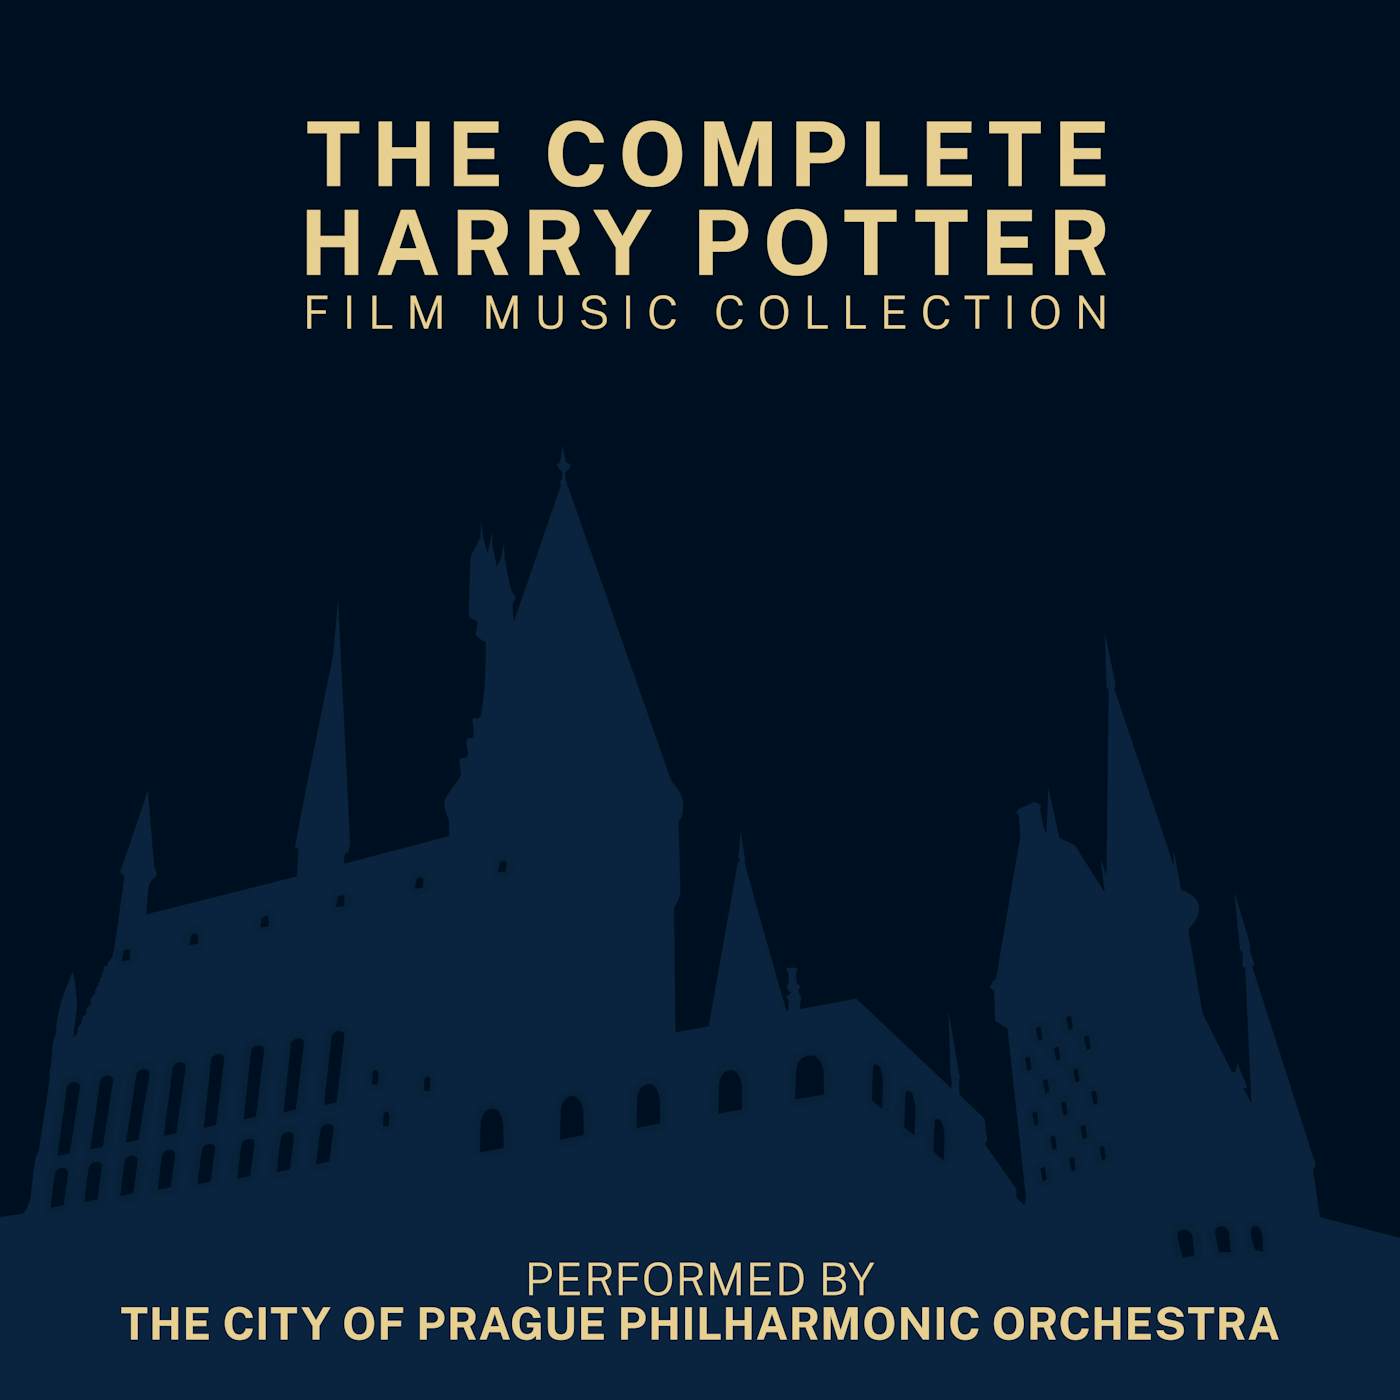 The City of Prague Philharmonic Orchestra The Complete Harry Potter Film Music Collection Vinyl Record